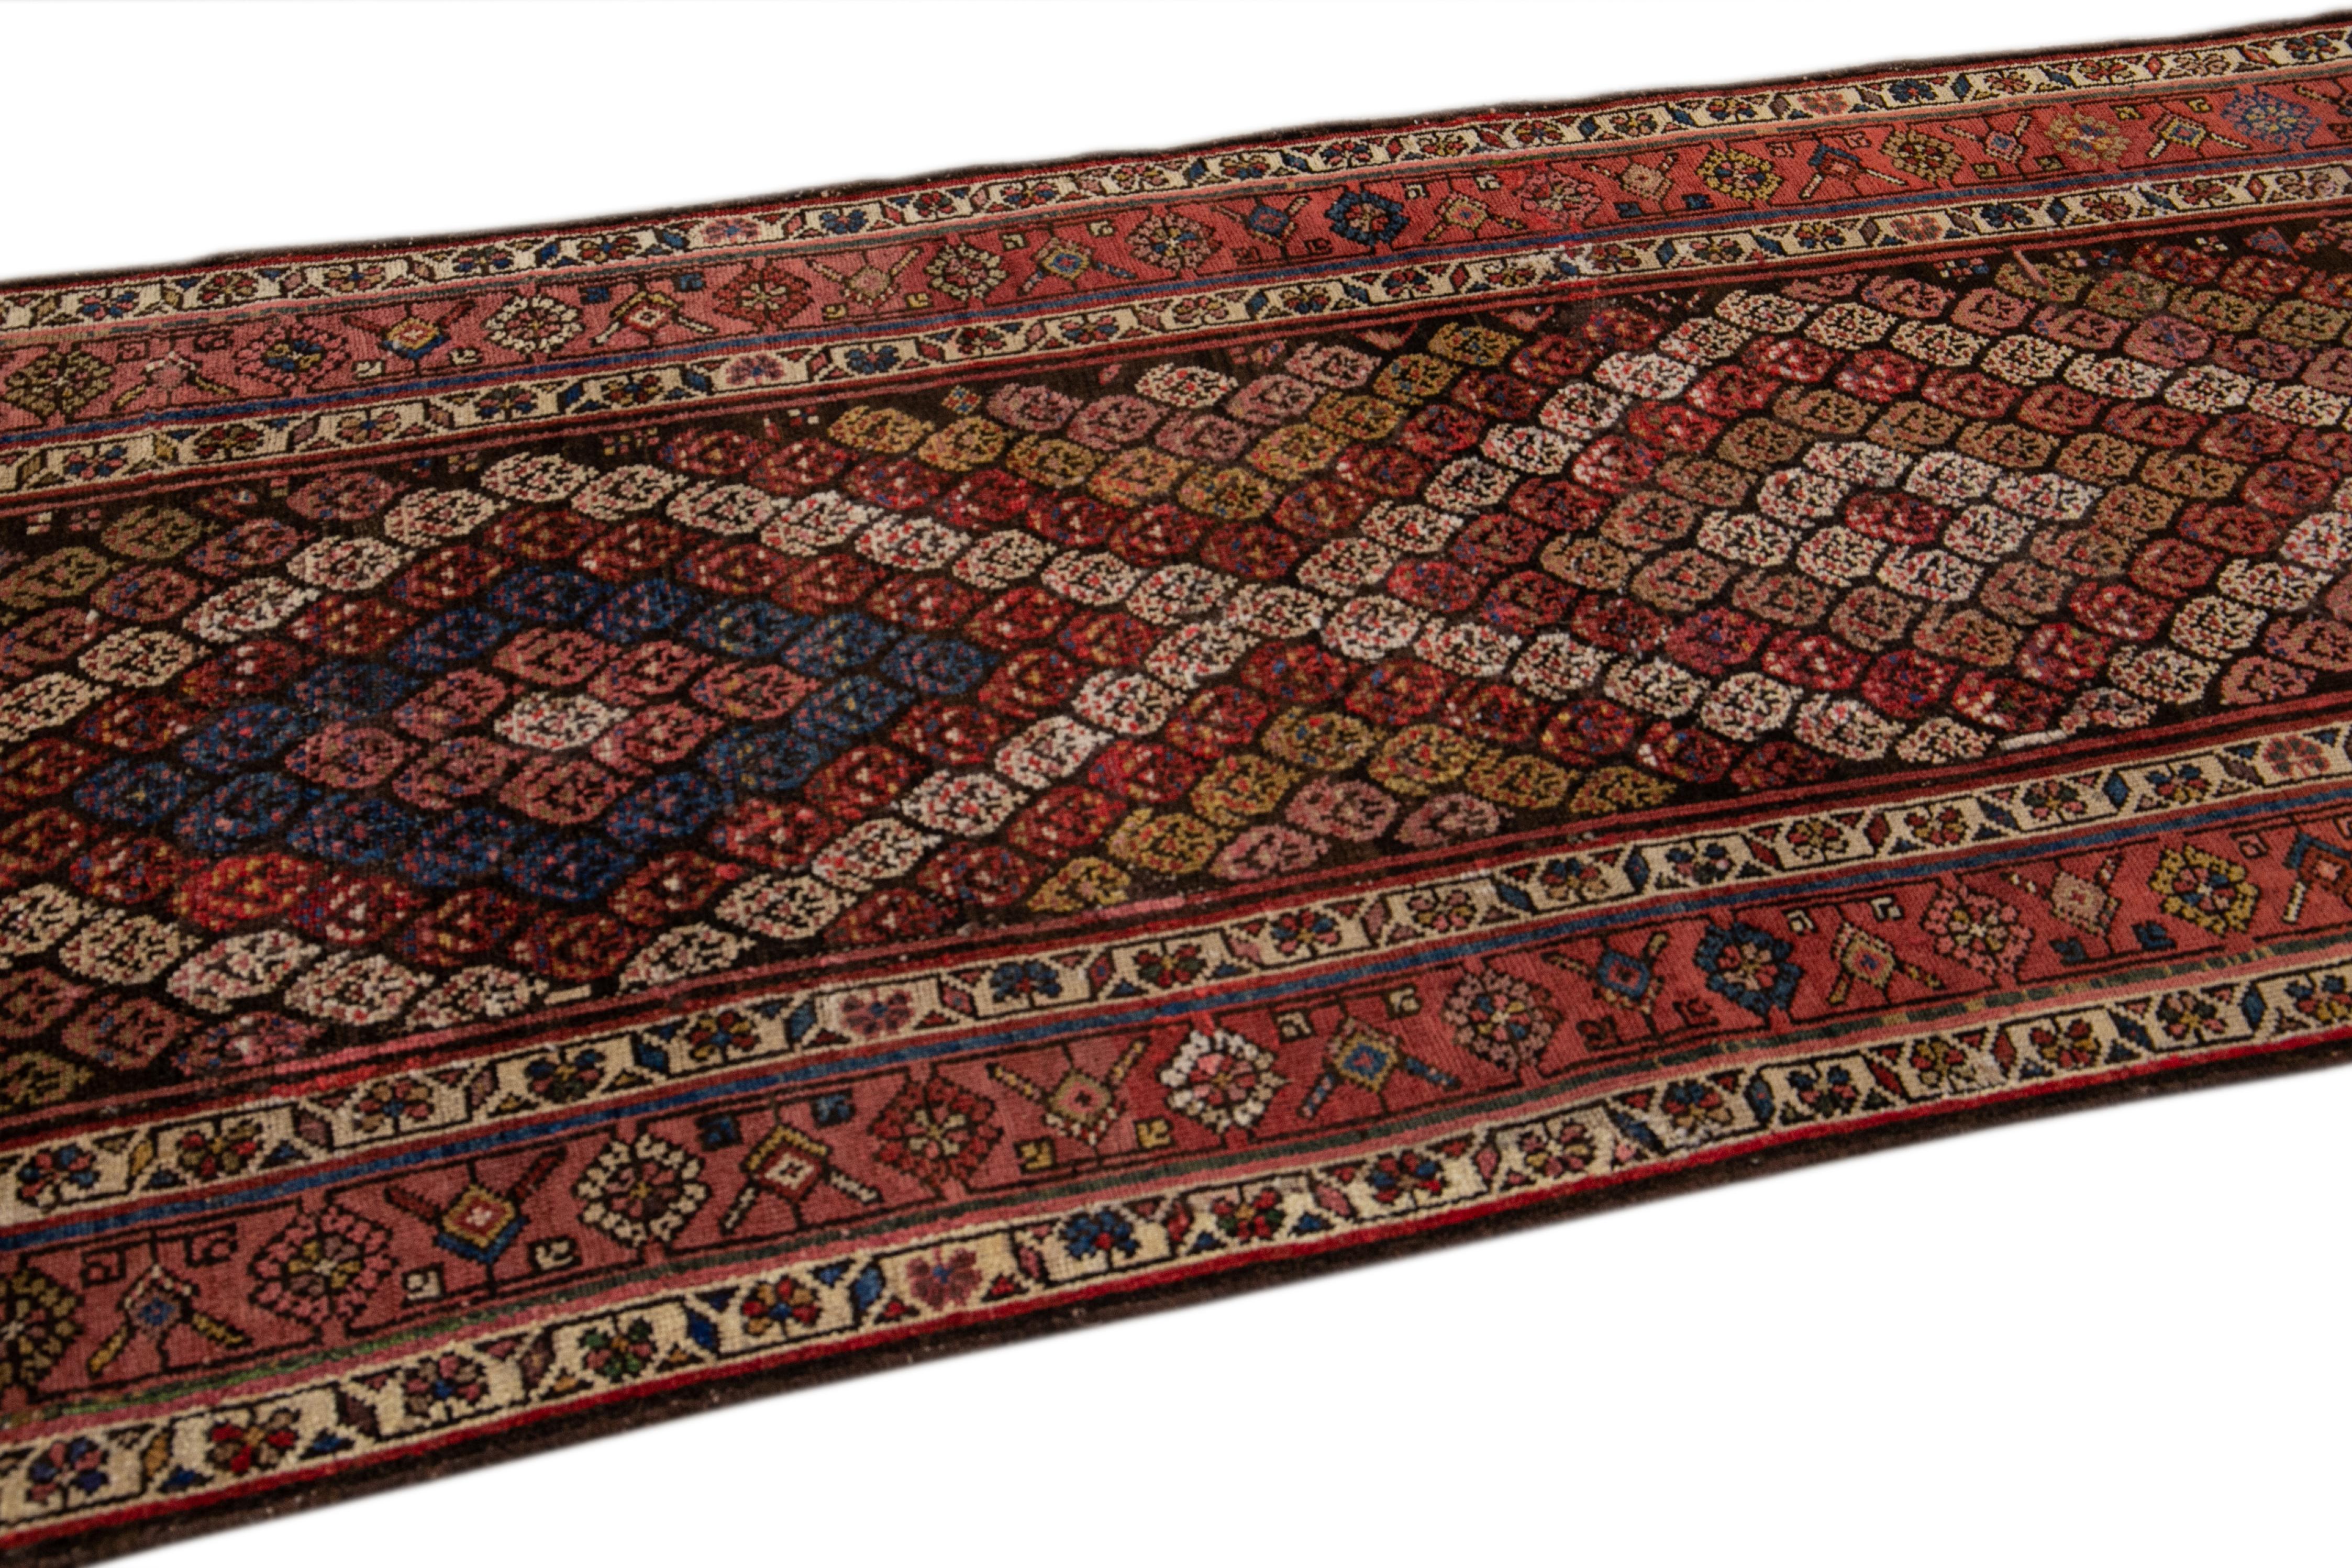 Antique Persian Kurd Handmade Allover Multicolor Wool Runner In Excellent Condition For Sale In Norwalk, CT